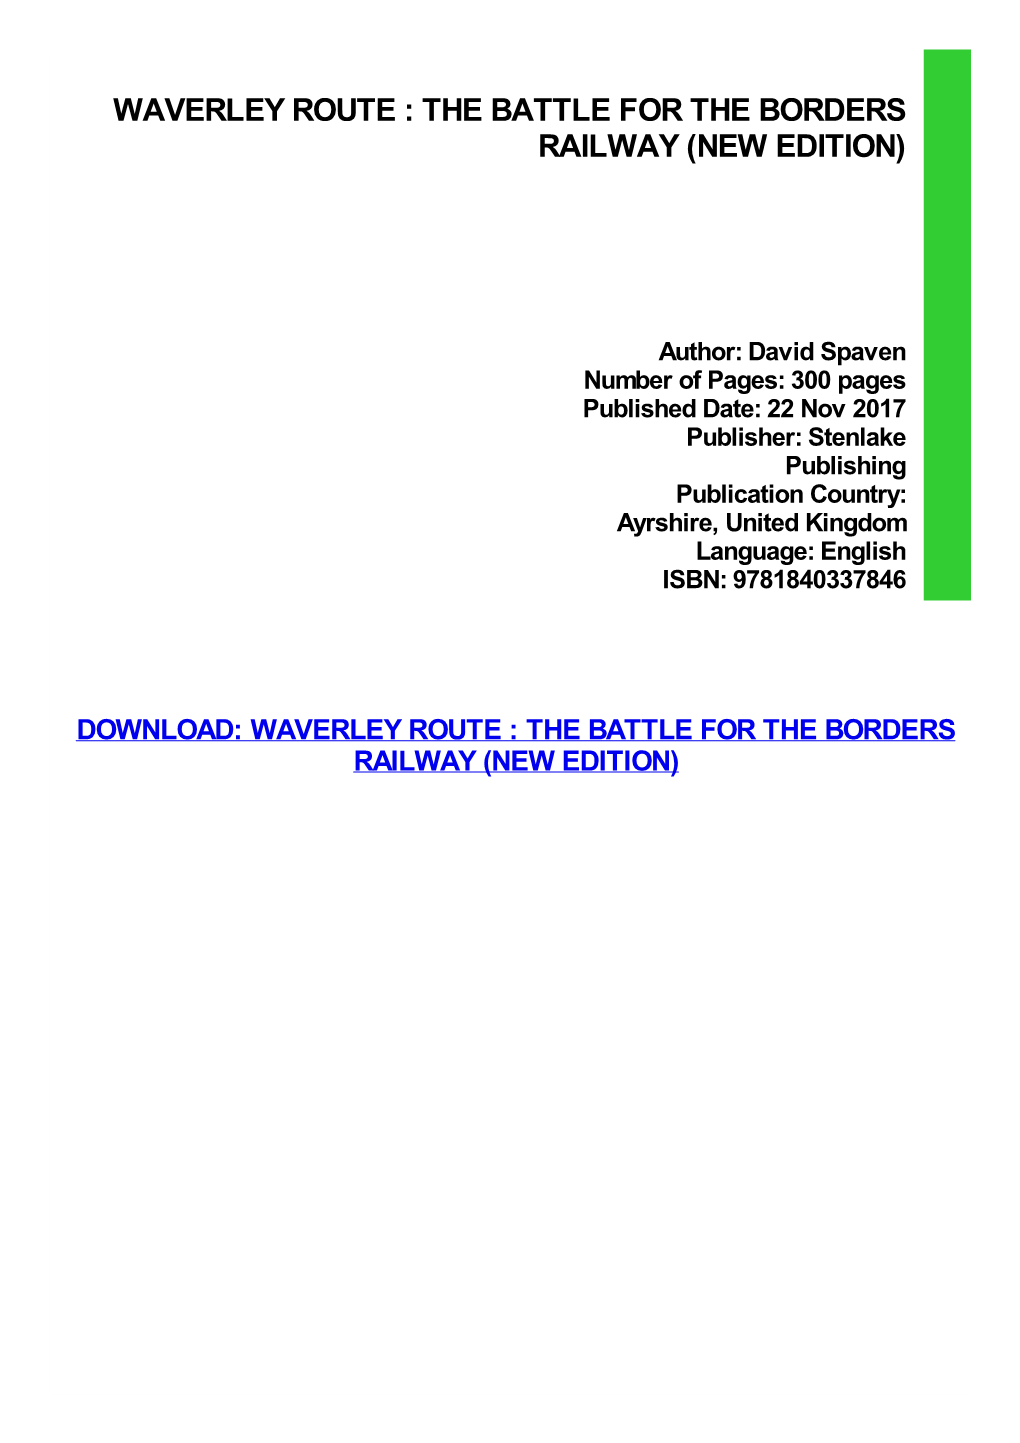 Waverley Route : the Battle for the Borders Railway (New Edition)